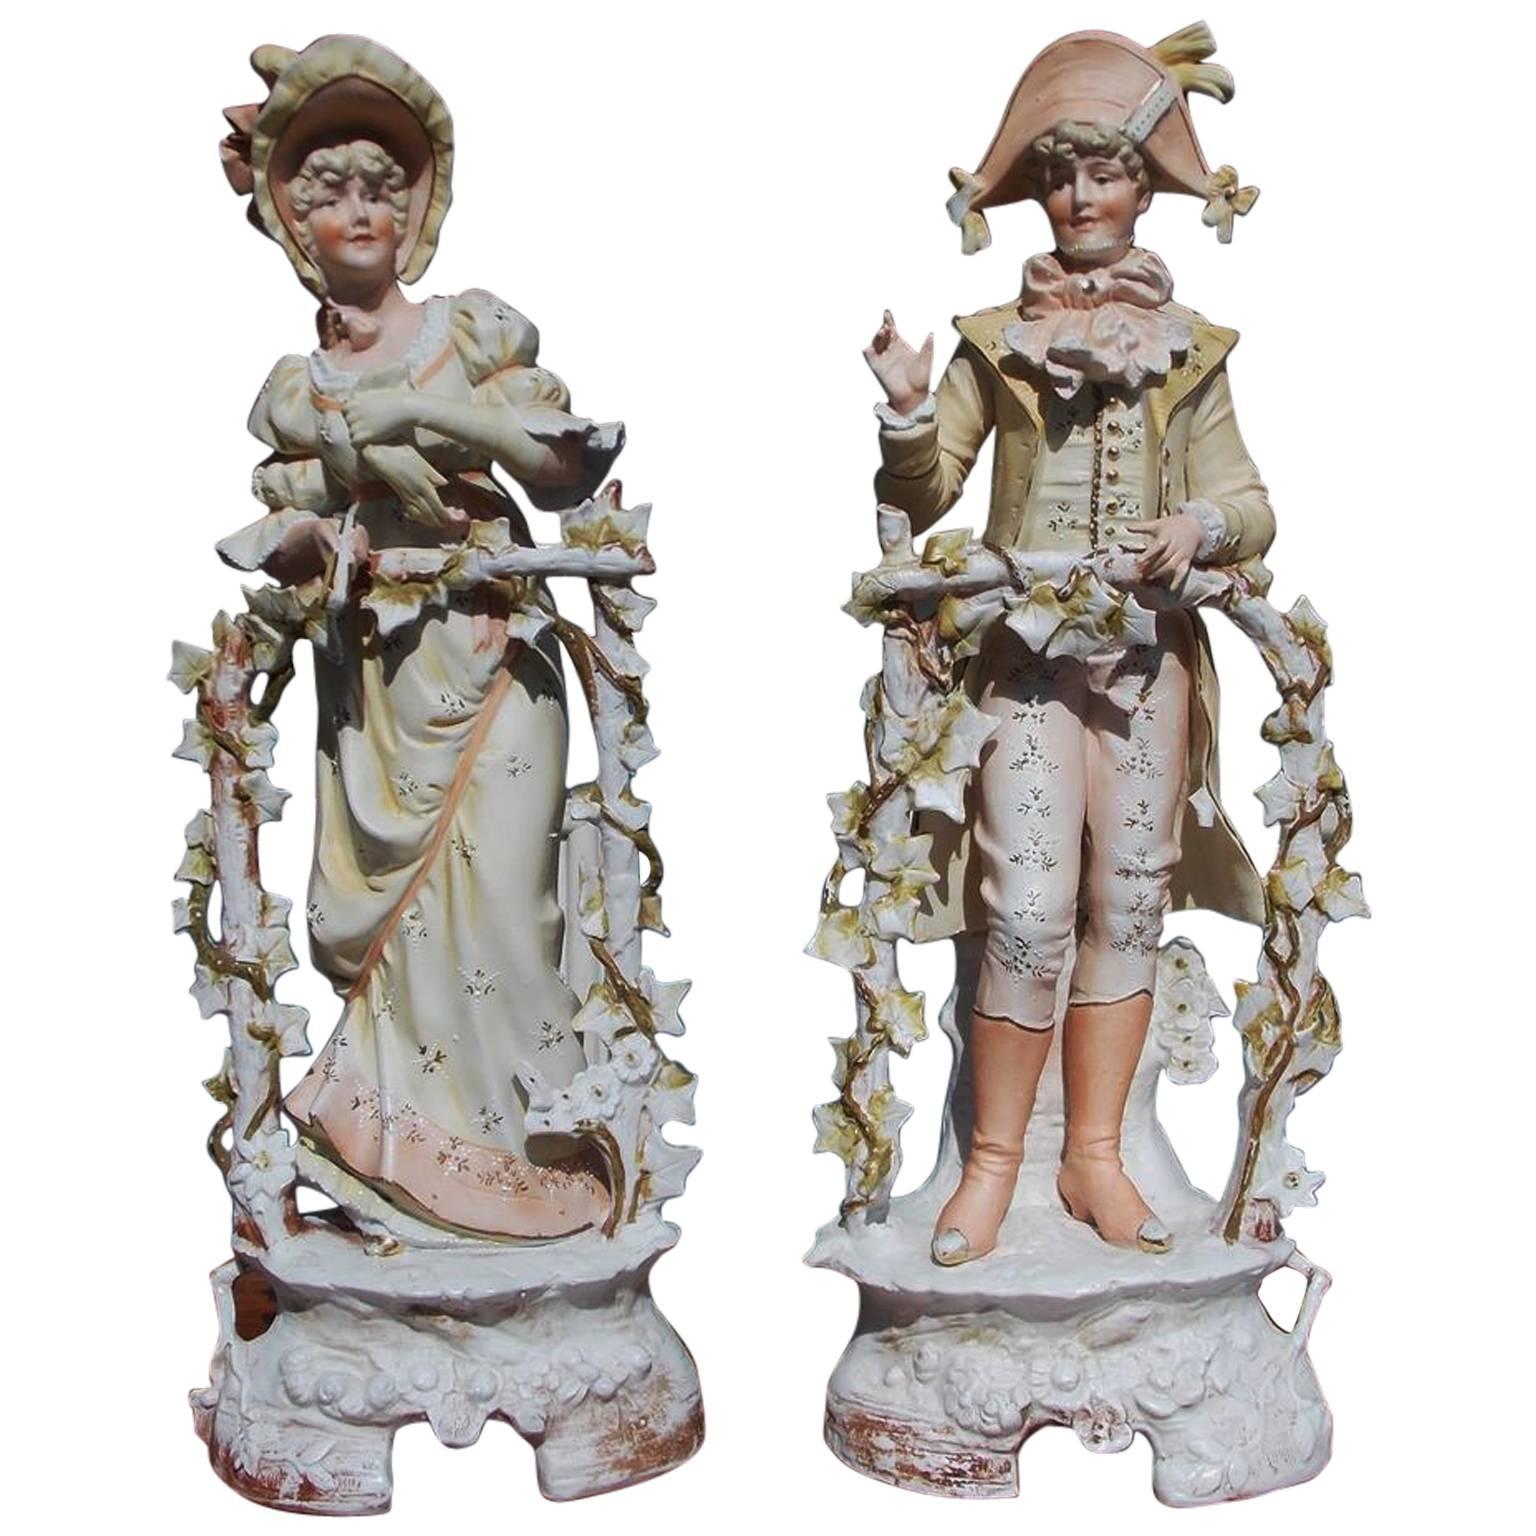 Pair of French Bisque Standing Figurines, Circa 1880